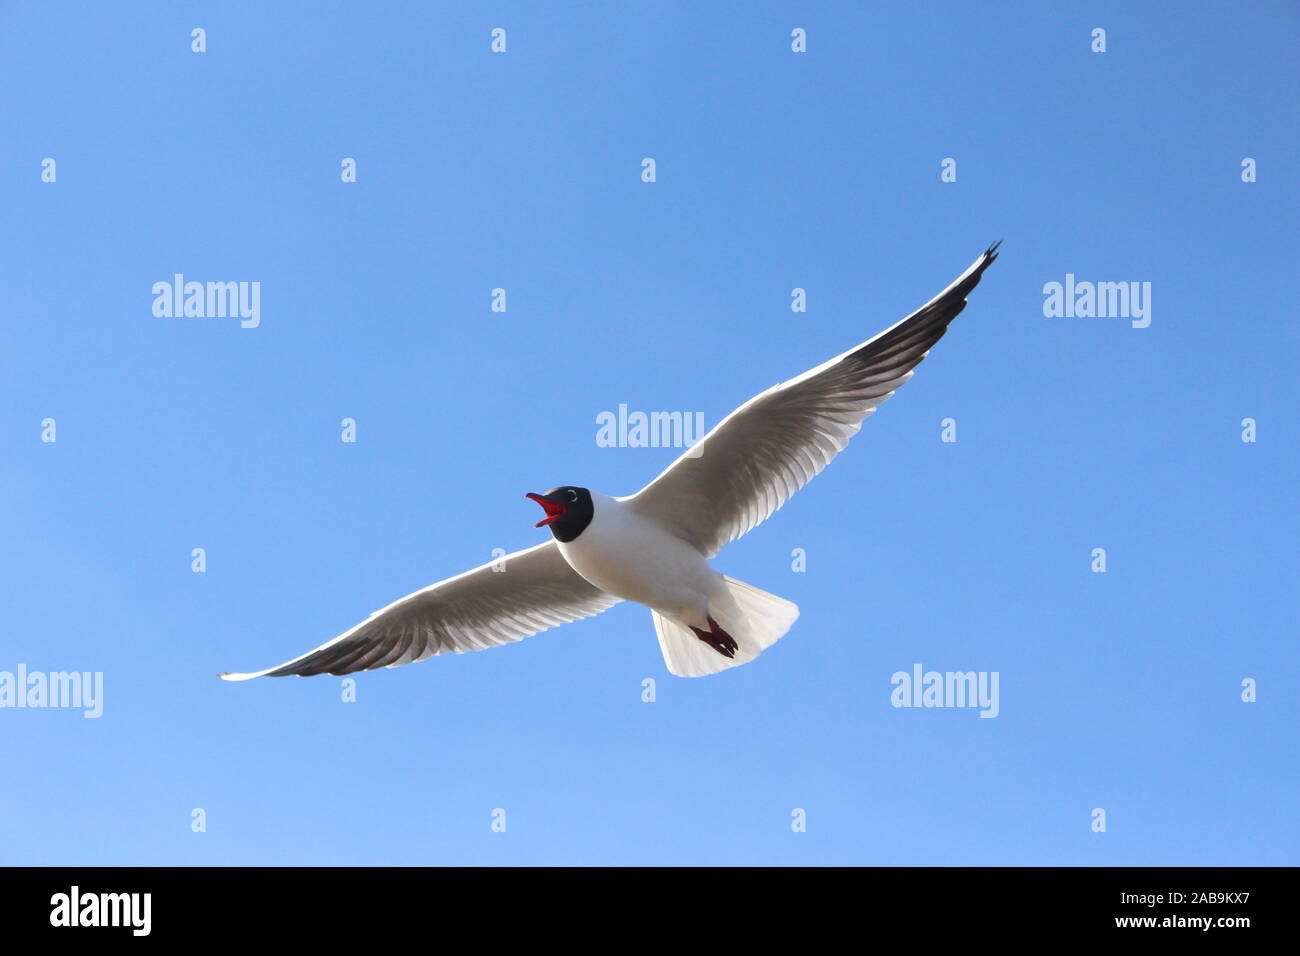 seagull flying and screaming with a bright blue sky behind Stock Photo